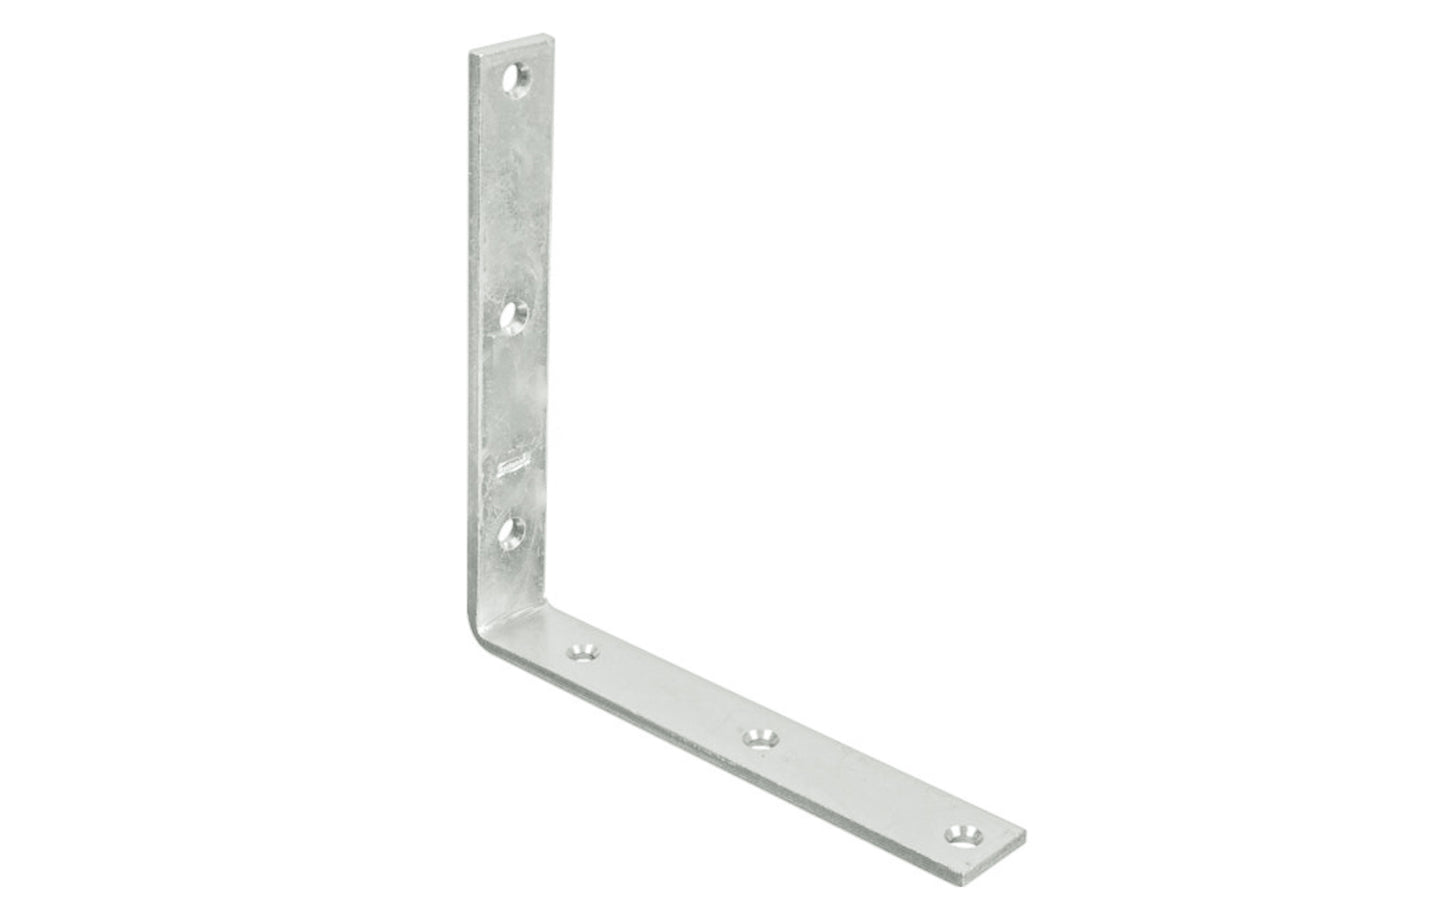 These corner braces are designed for furniture, cabinets, shelving support. Allows for quick & easy repair of items in the workshop, home, etc. Made of steel material with a zinc plated finish. Manufactured from hot-rolled steel. Countersunk holes. 8" long size x 1-1/4" width. National Hardware - Model N220-178.